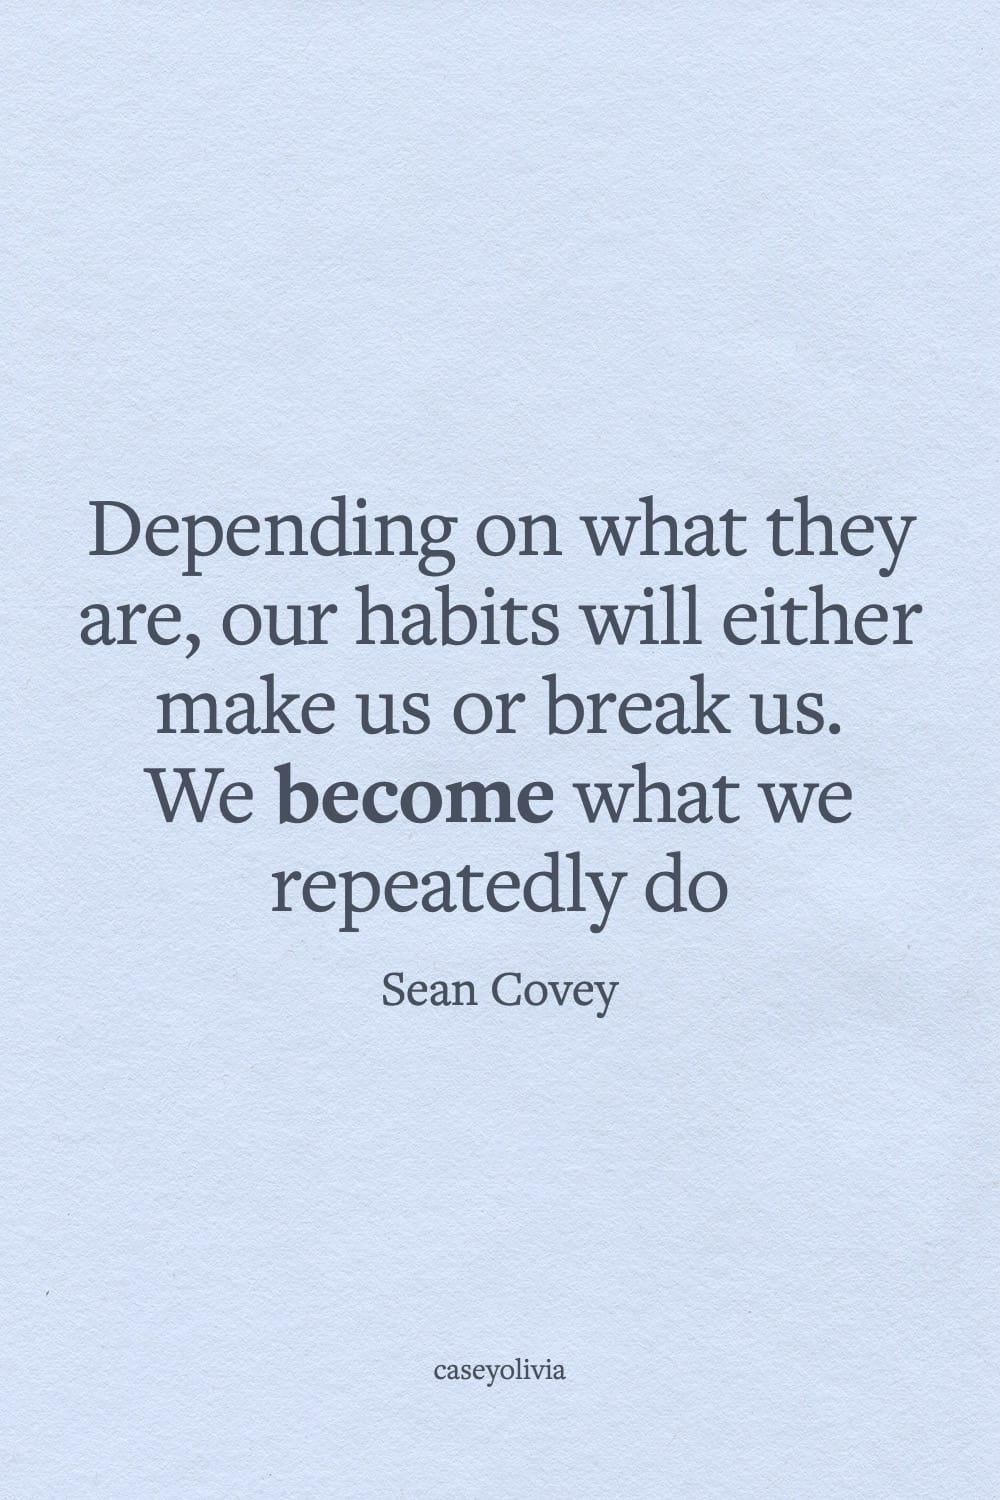 sean covey habit saying about becoming what you repeat